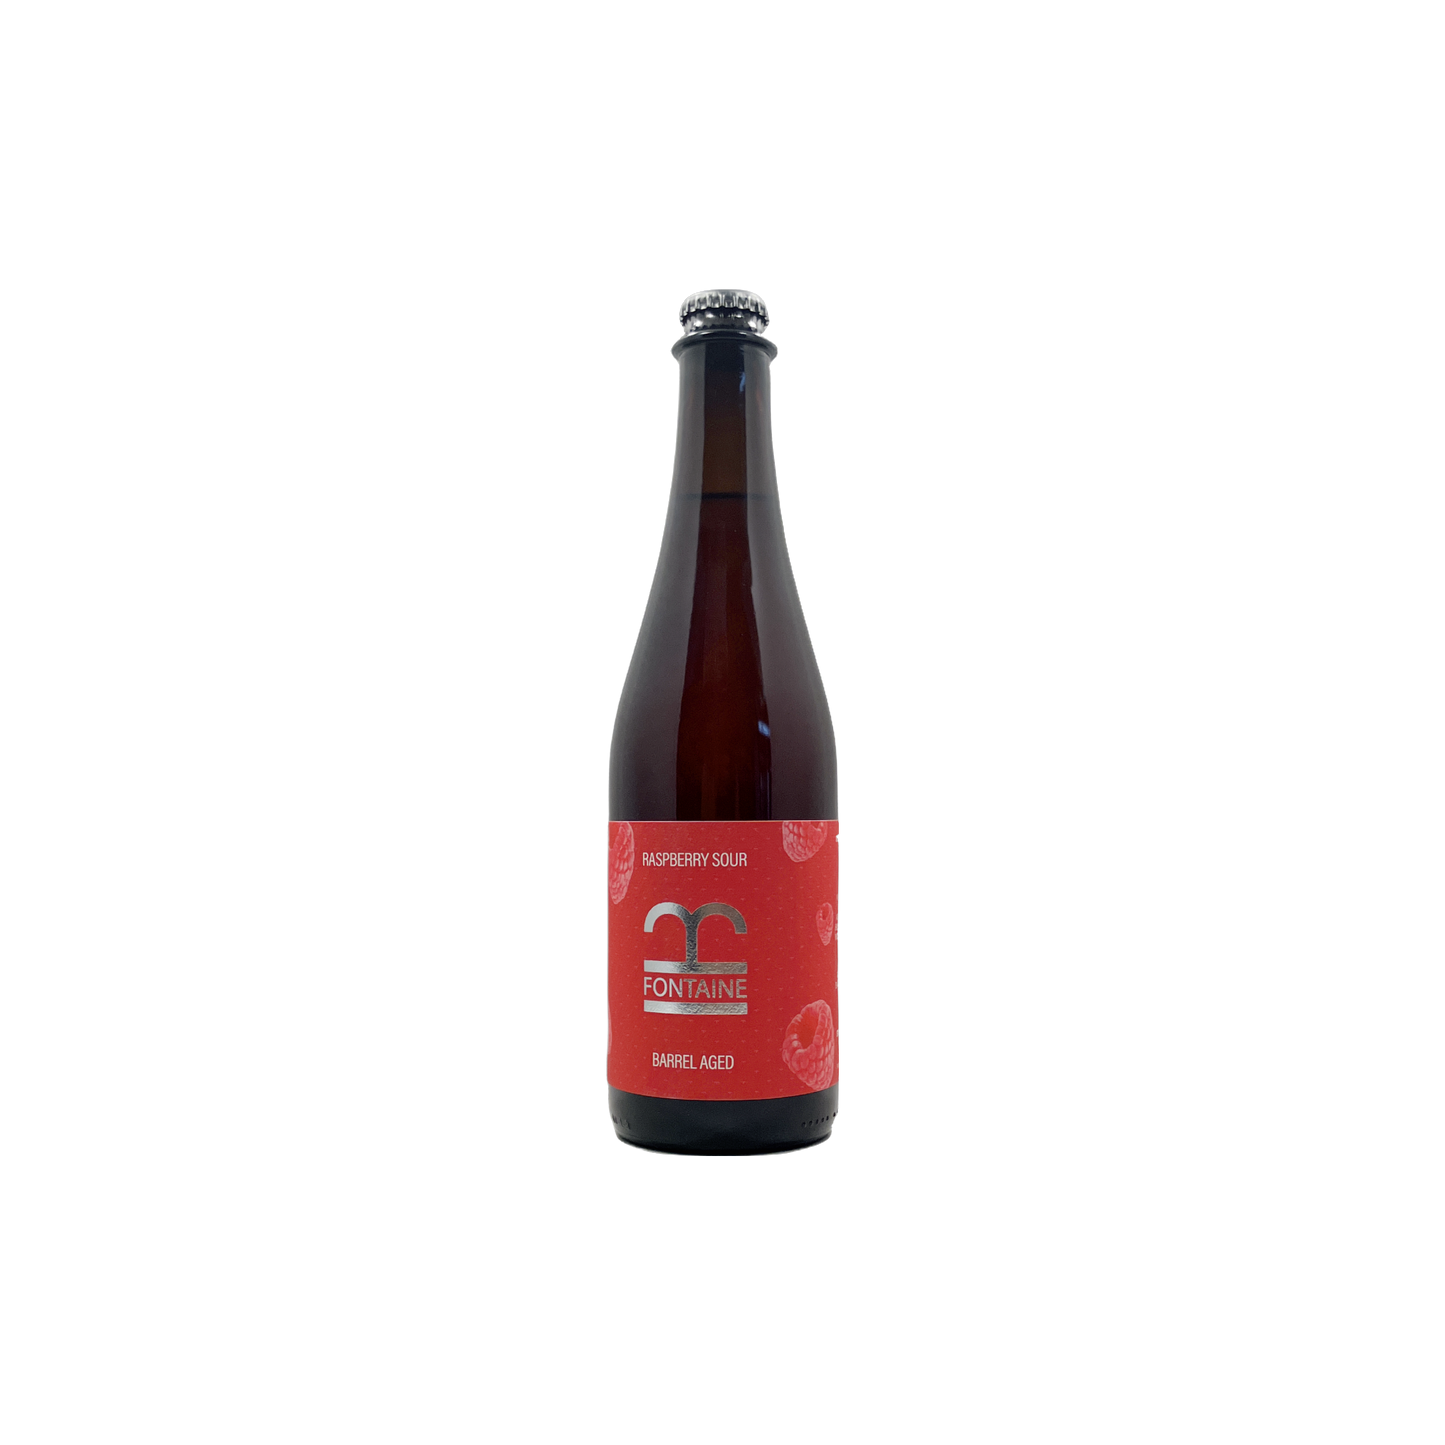 Fontaine Raspberry Sour Barrel Aged 500ml